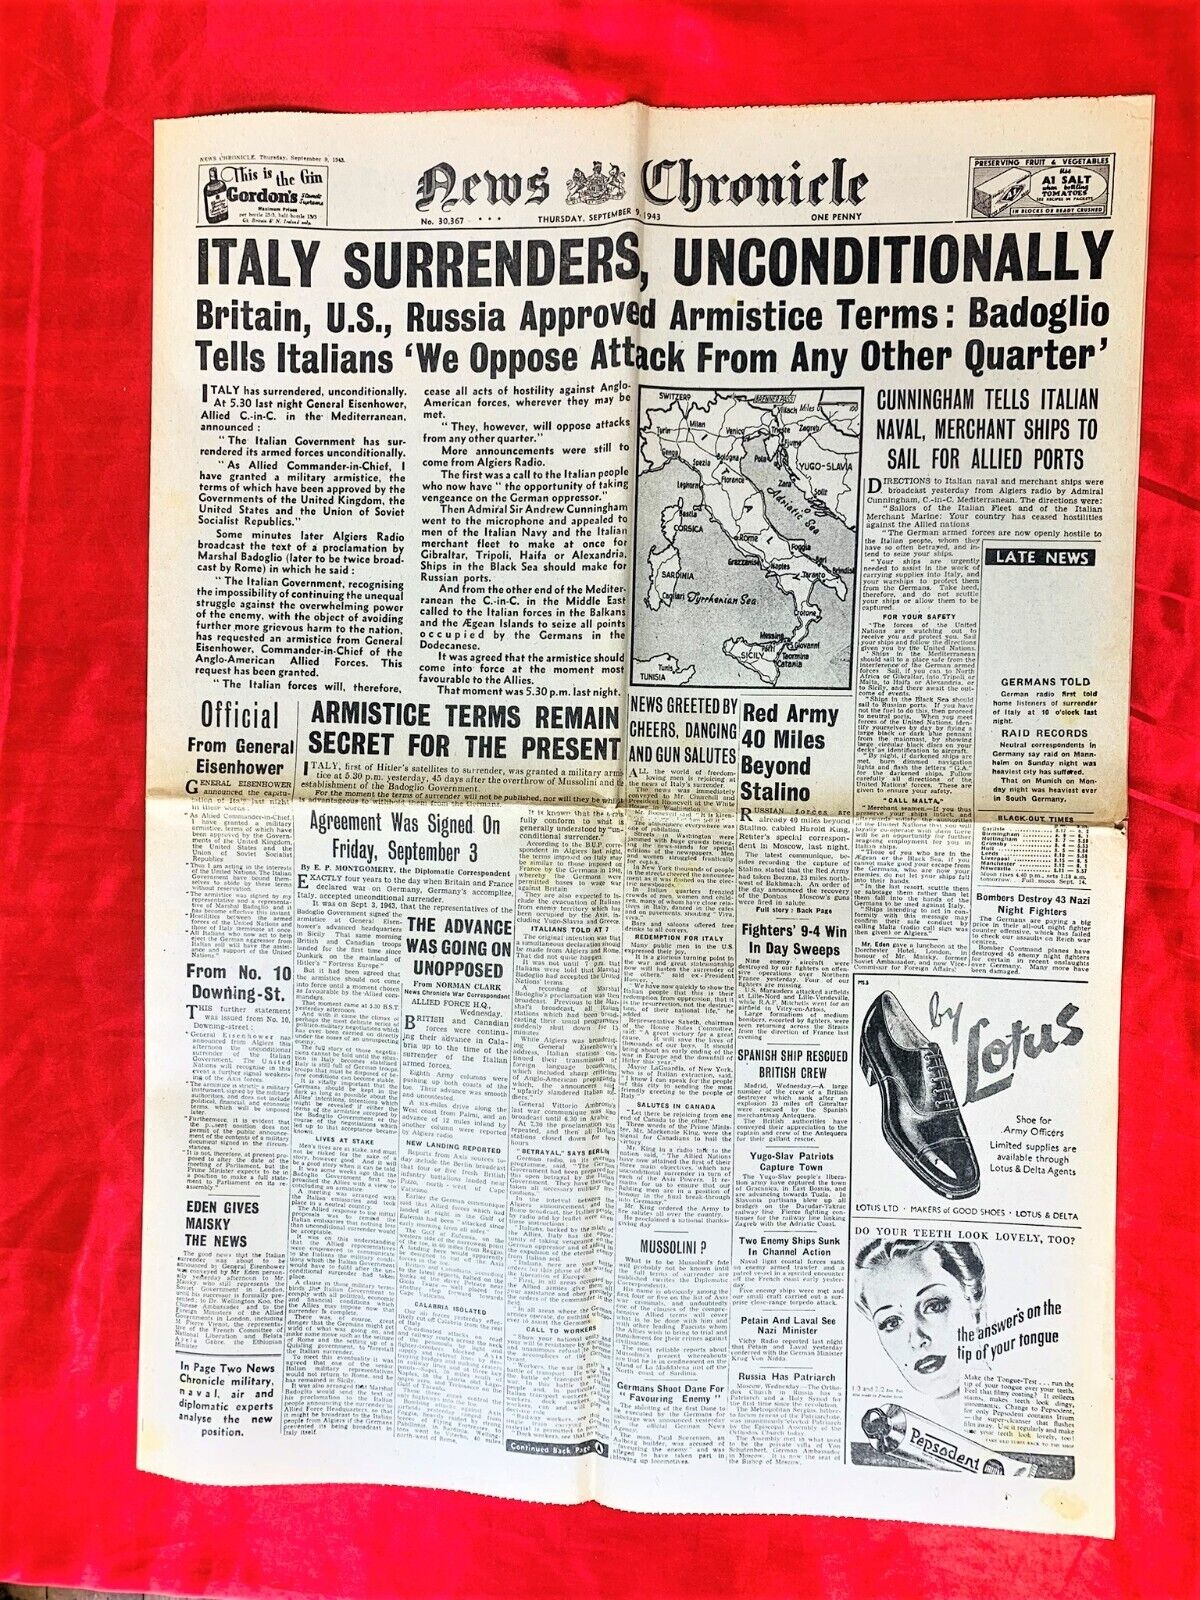 Original Wartime Newspaper - Italy Surrenders - News Chronicle - 09/09/43